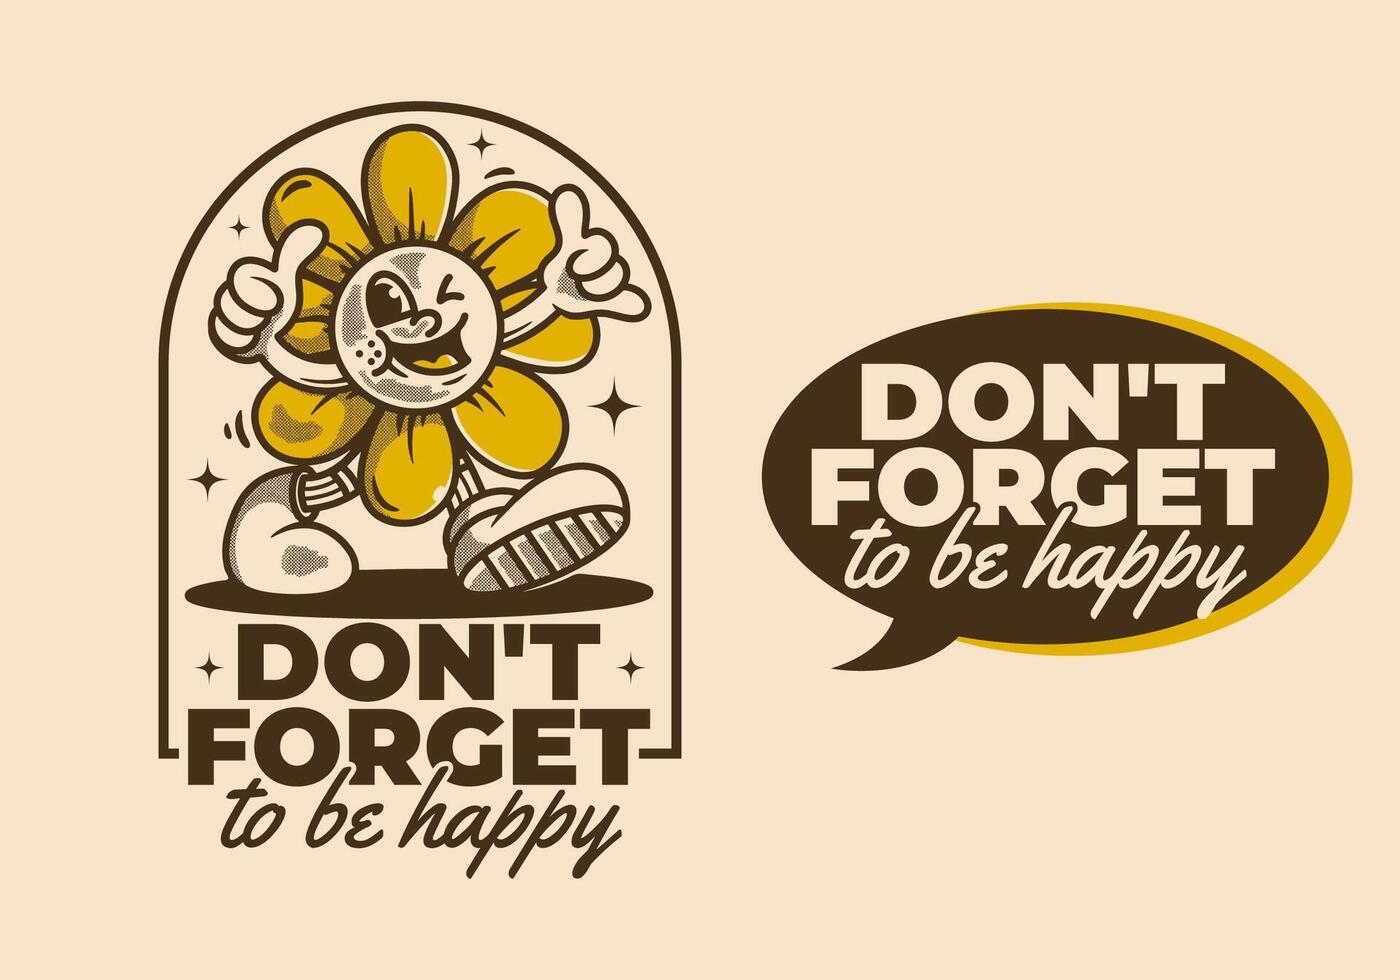 Don't forget to be happy. Walking sun flower character in vintage retro style vector